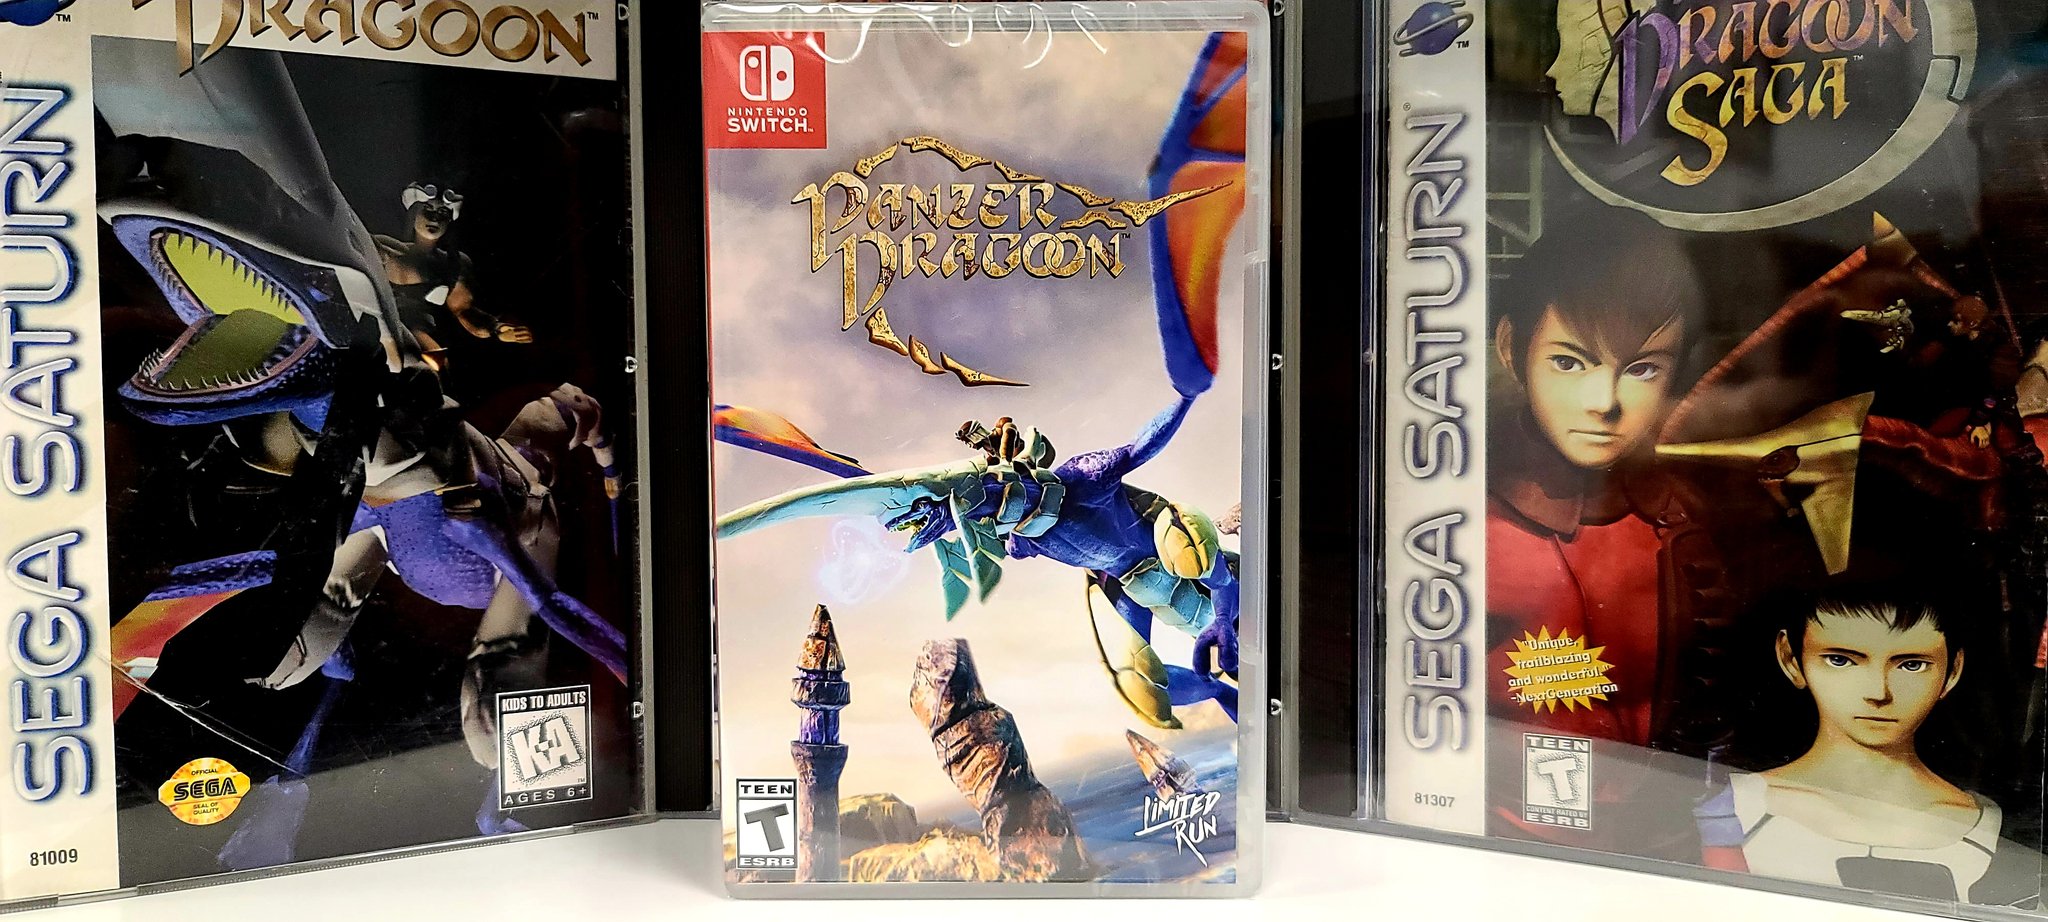 The Panzer Dragoon: Remake Standard Edition is Now Shipping